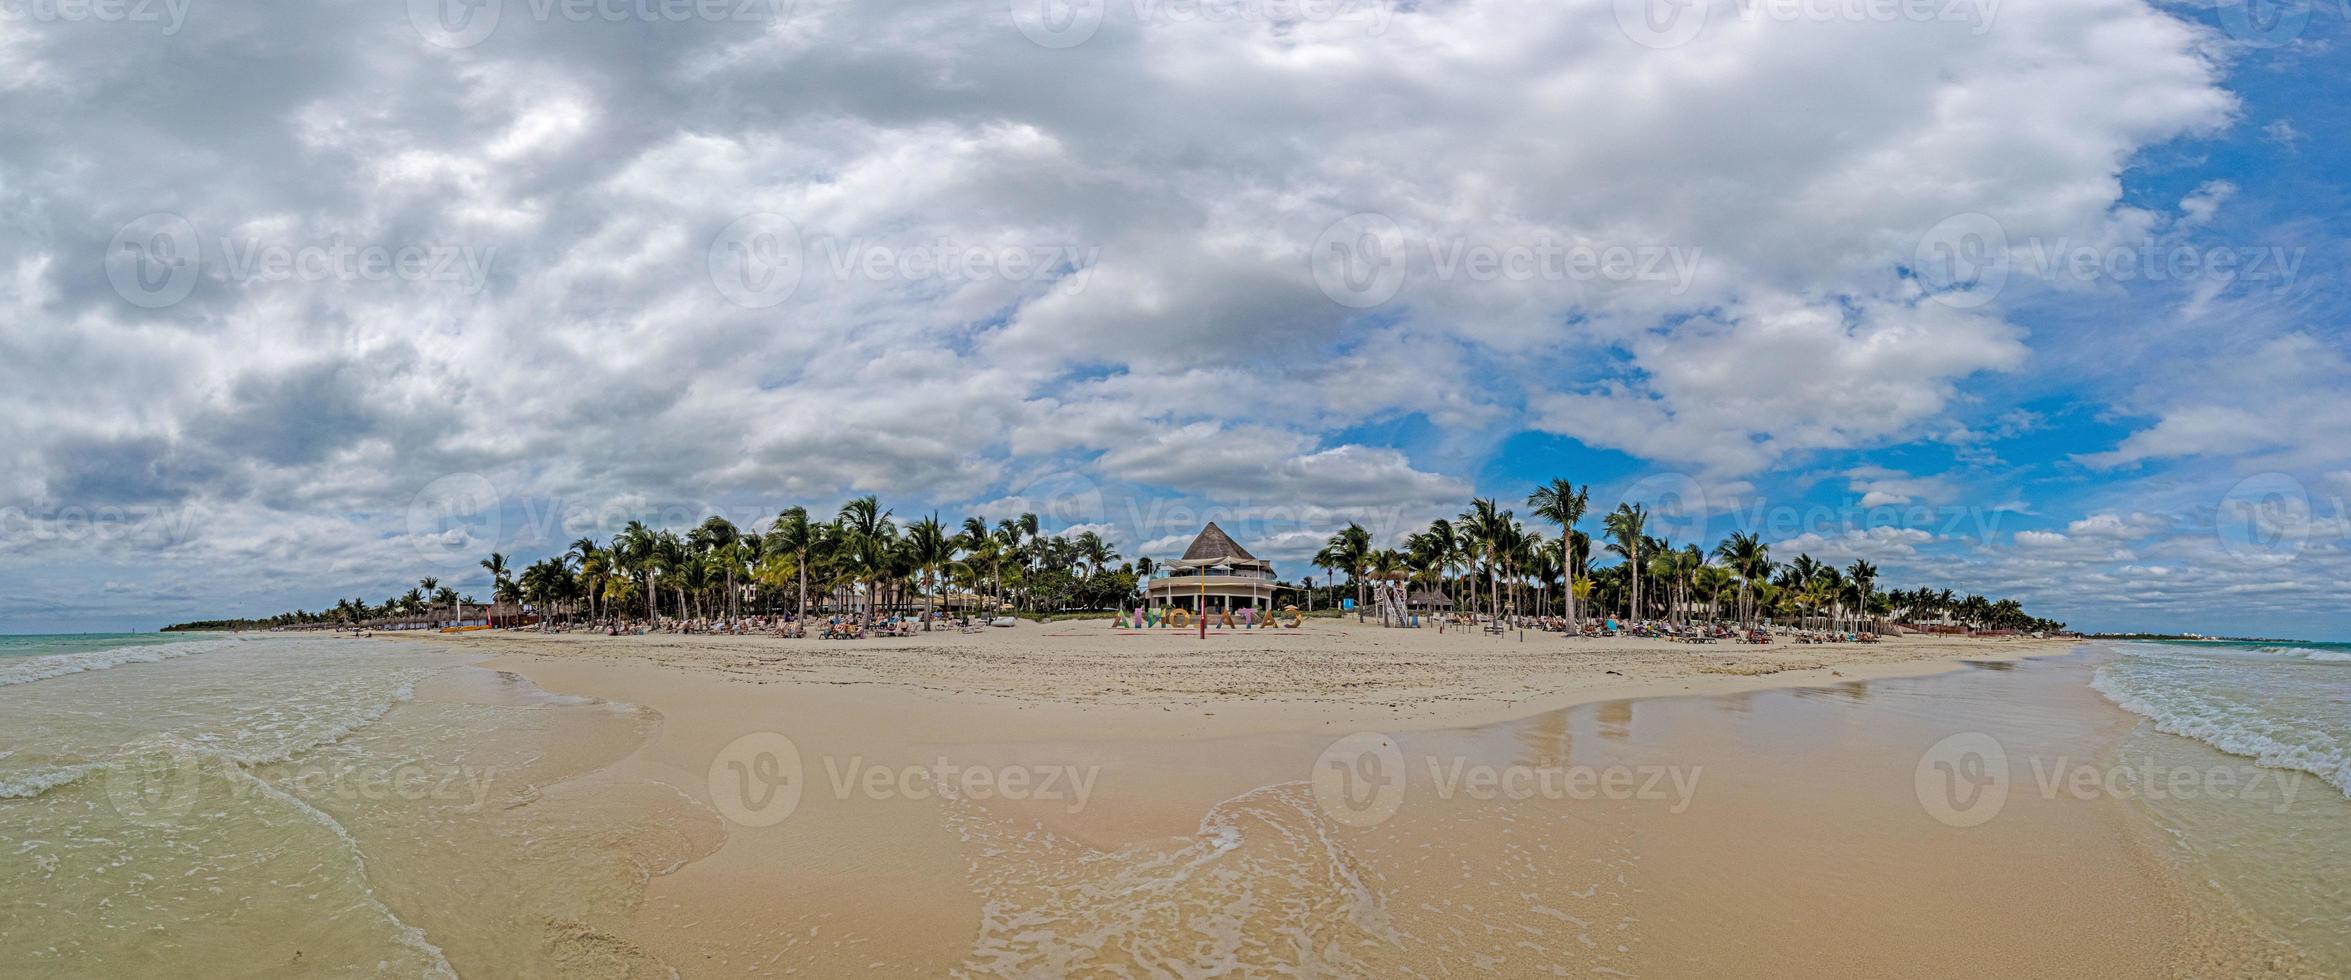 Panorama over a tropical beach taken from the water during the day with sunshine photo